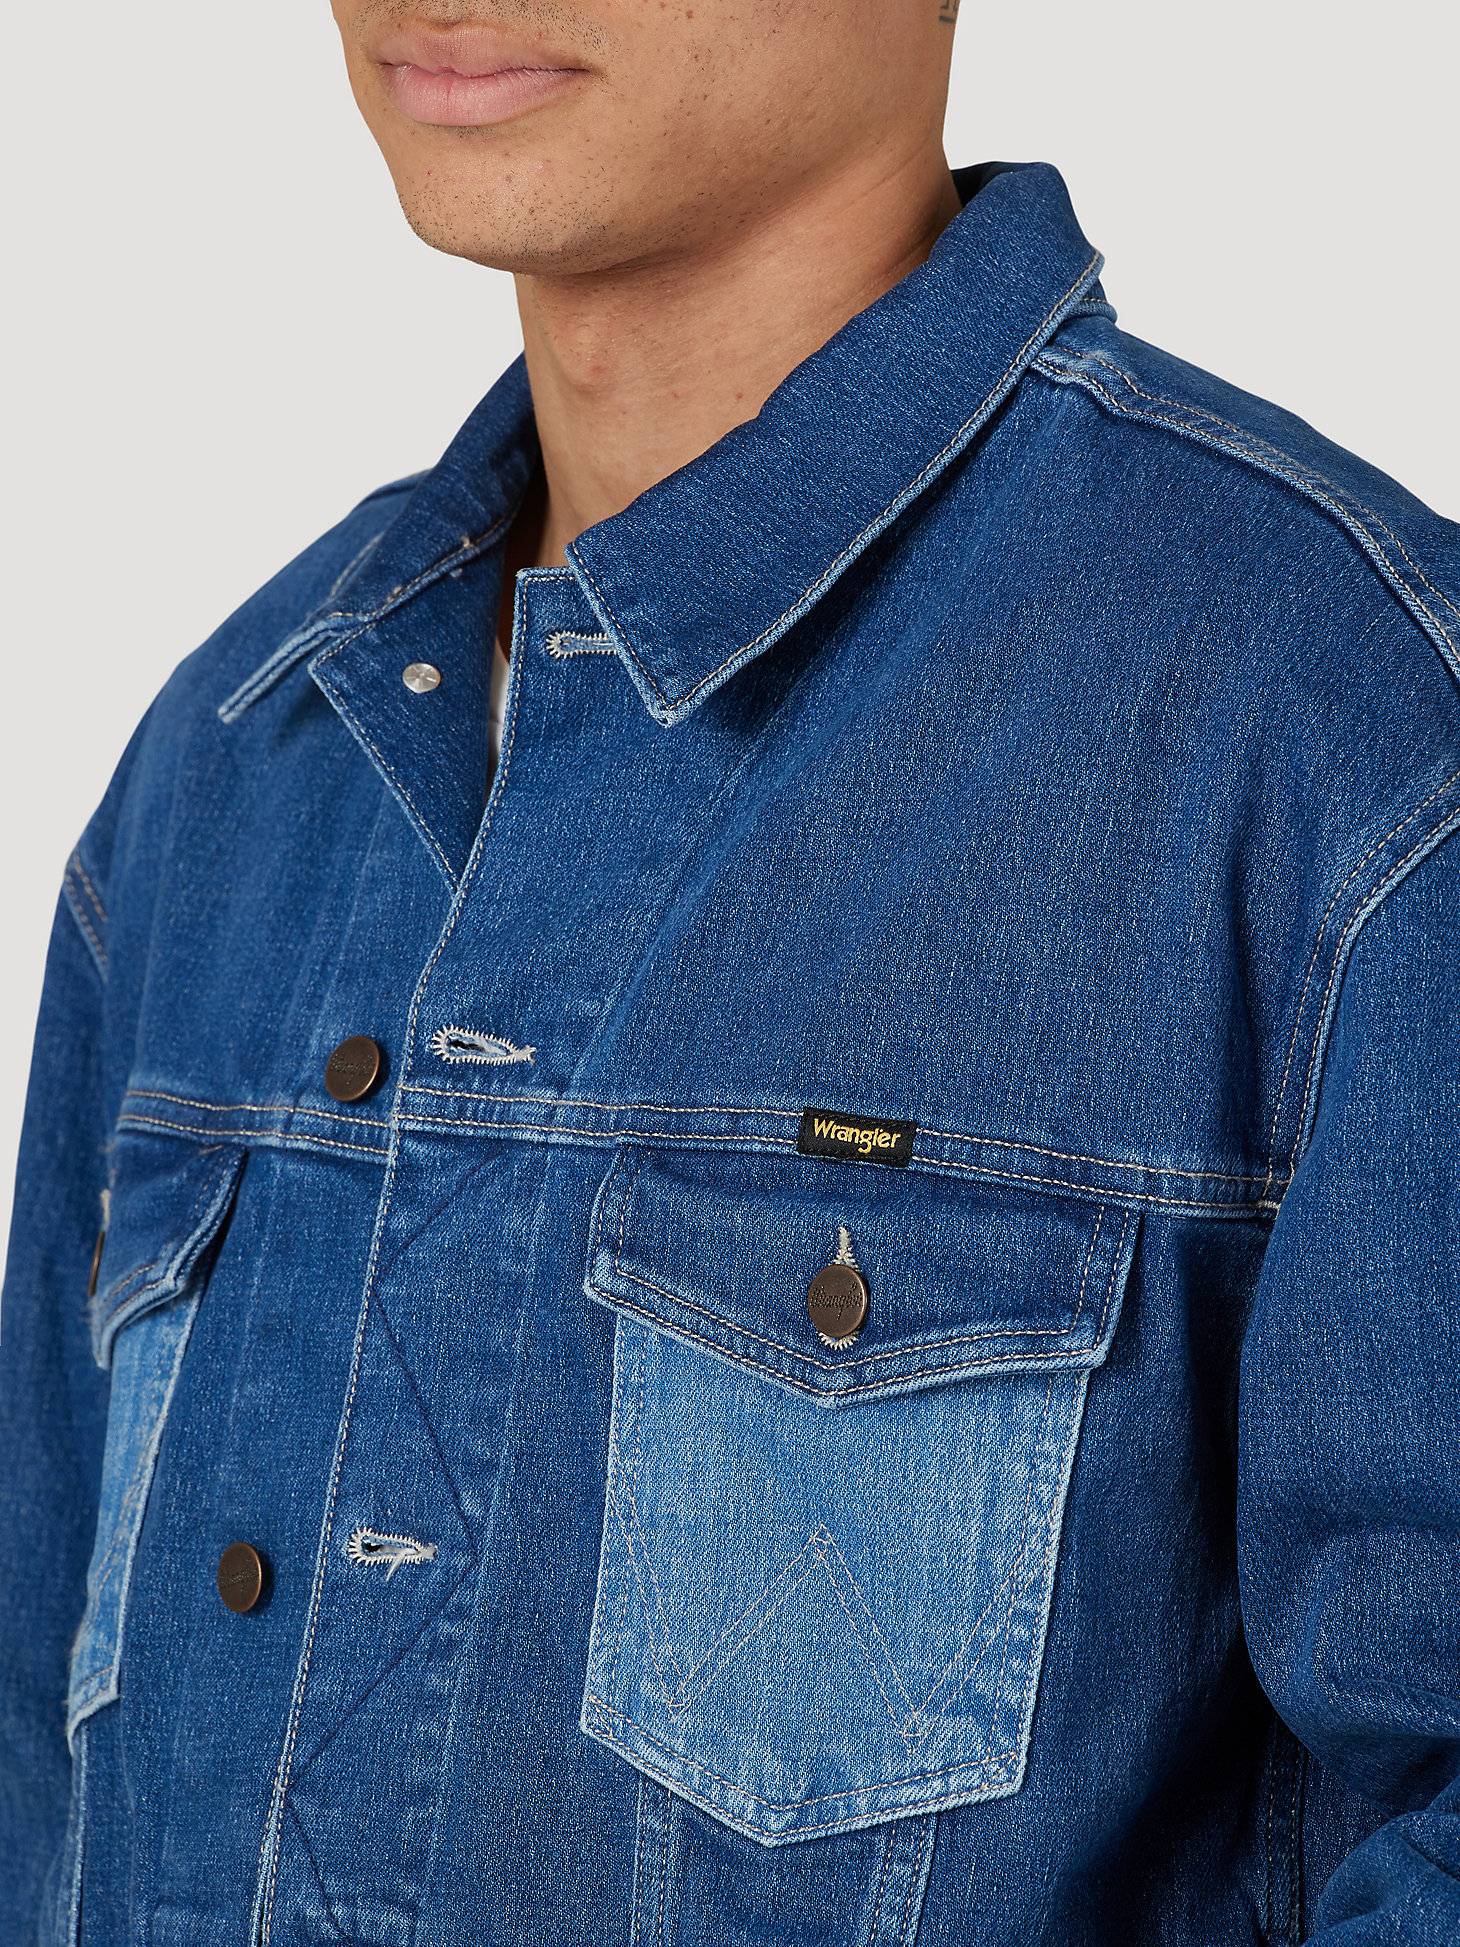 Men's Heritage Anti-Fit Embroidered Jacket in Blue Block alternative view 5